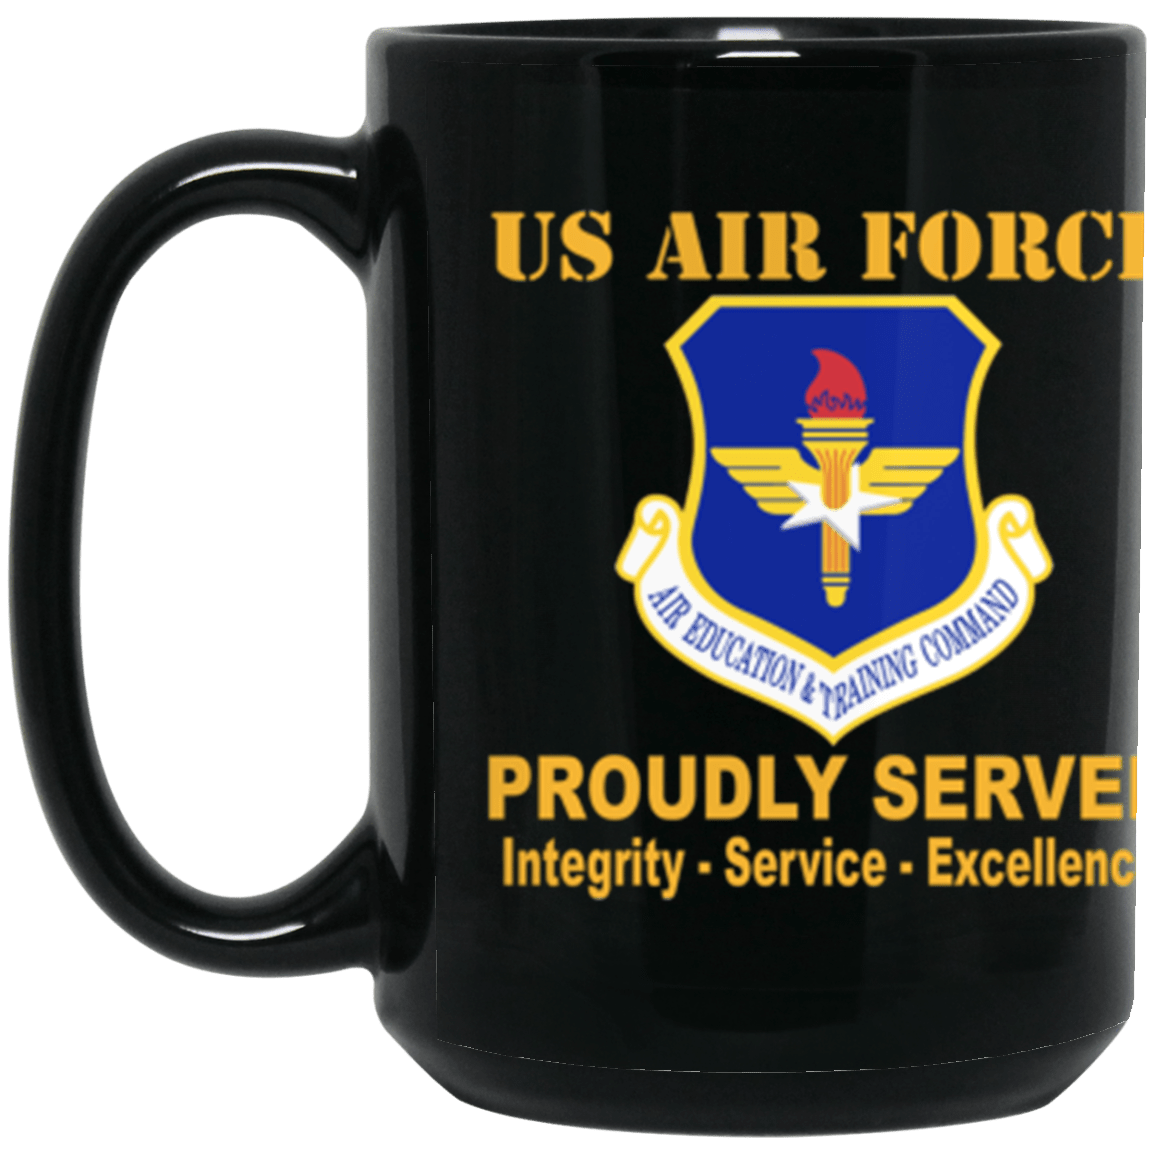 US Air Force Air Education and Training Command Proudly Served Core Values 15 oz. Black Mug-Drinkware-Veterans Nation